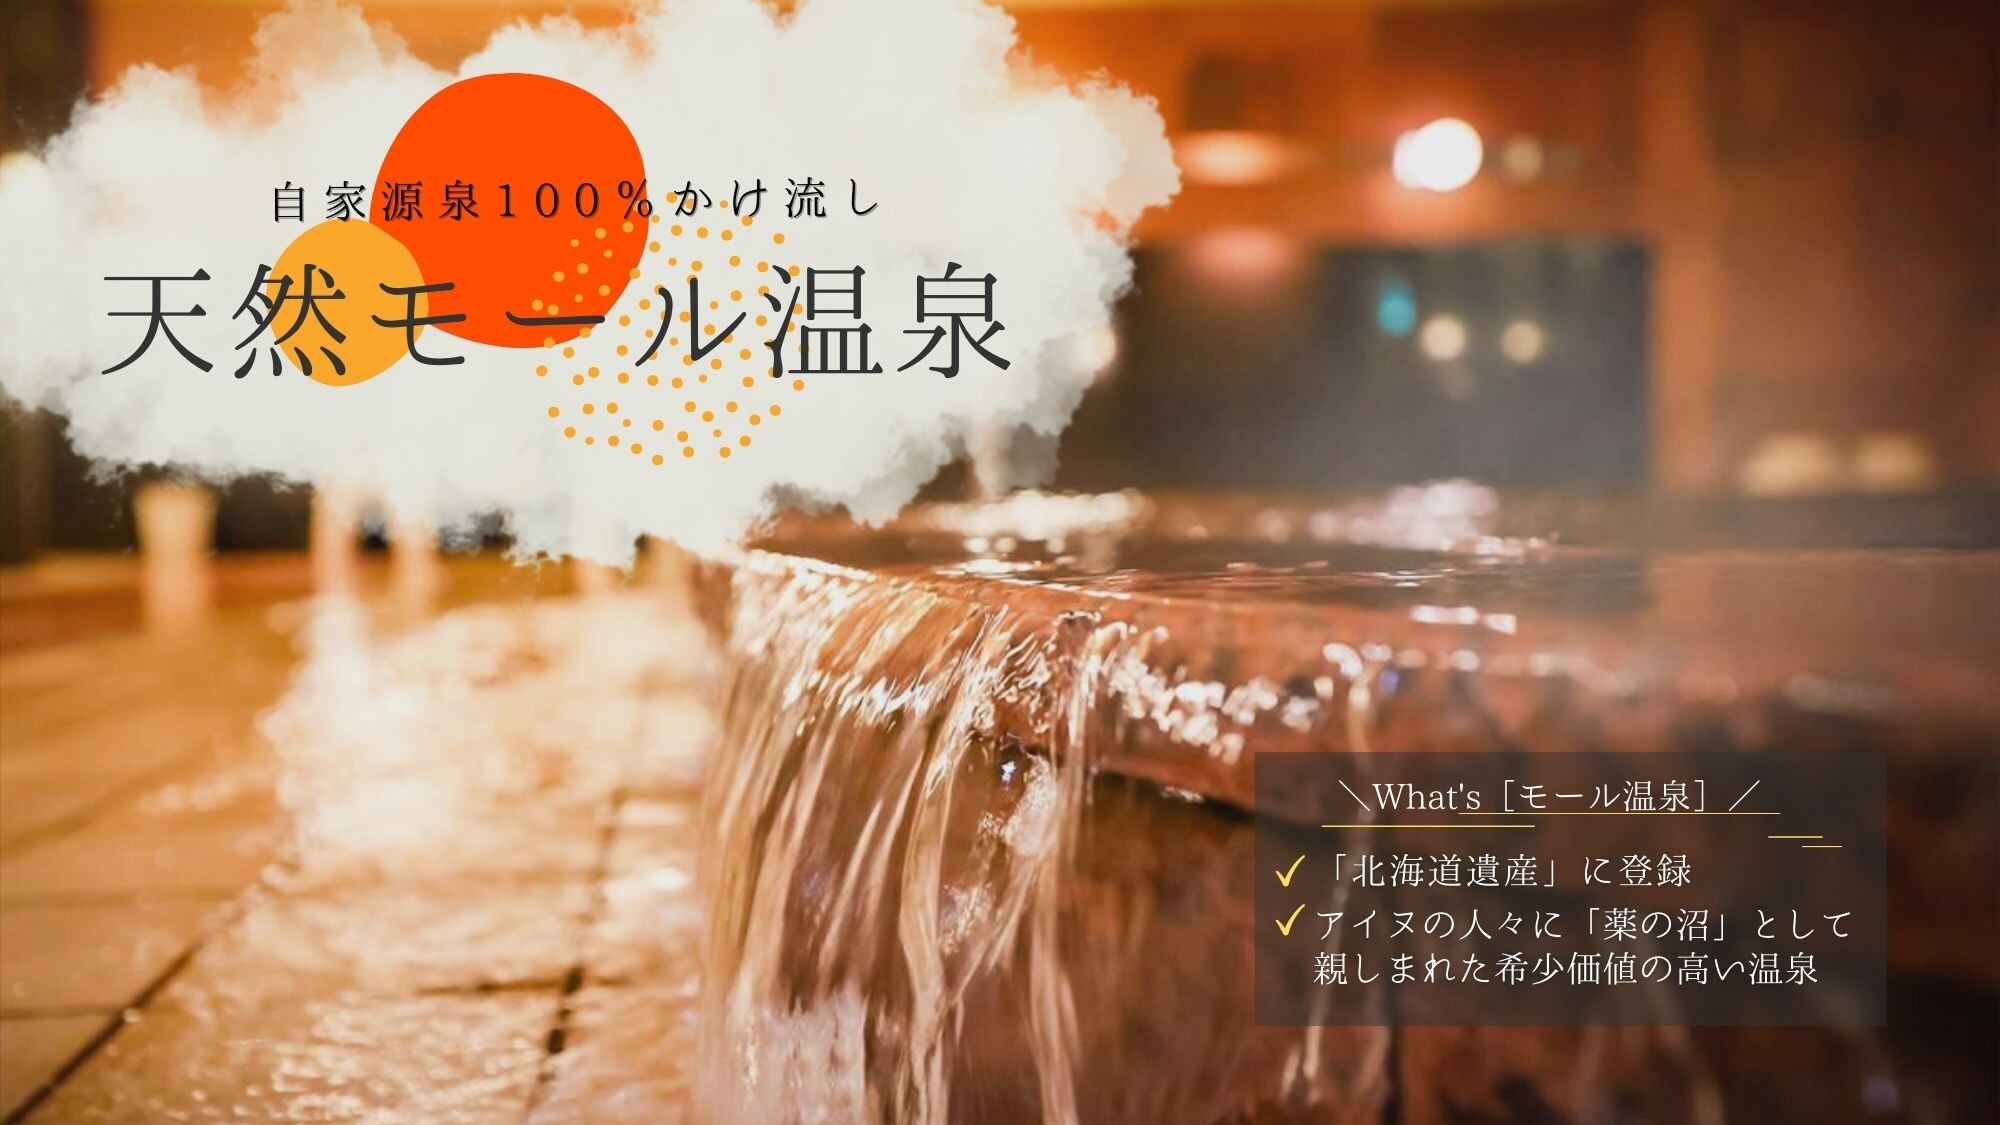 [Large communal bath] The only "hot spring flowing directly from the source" in front of Obihiro Station